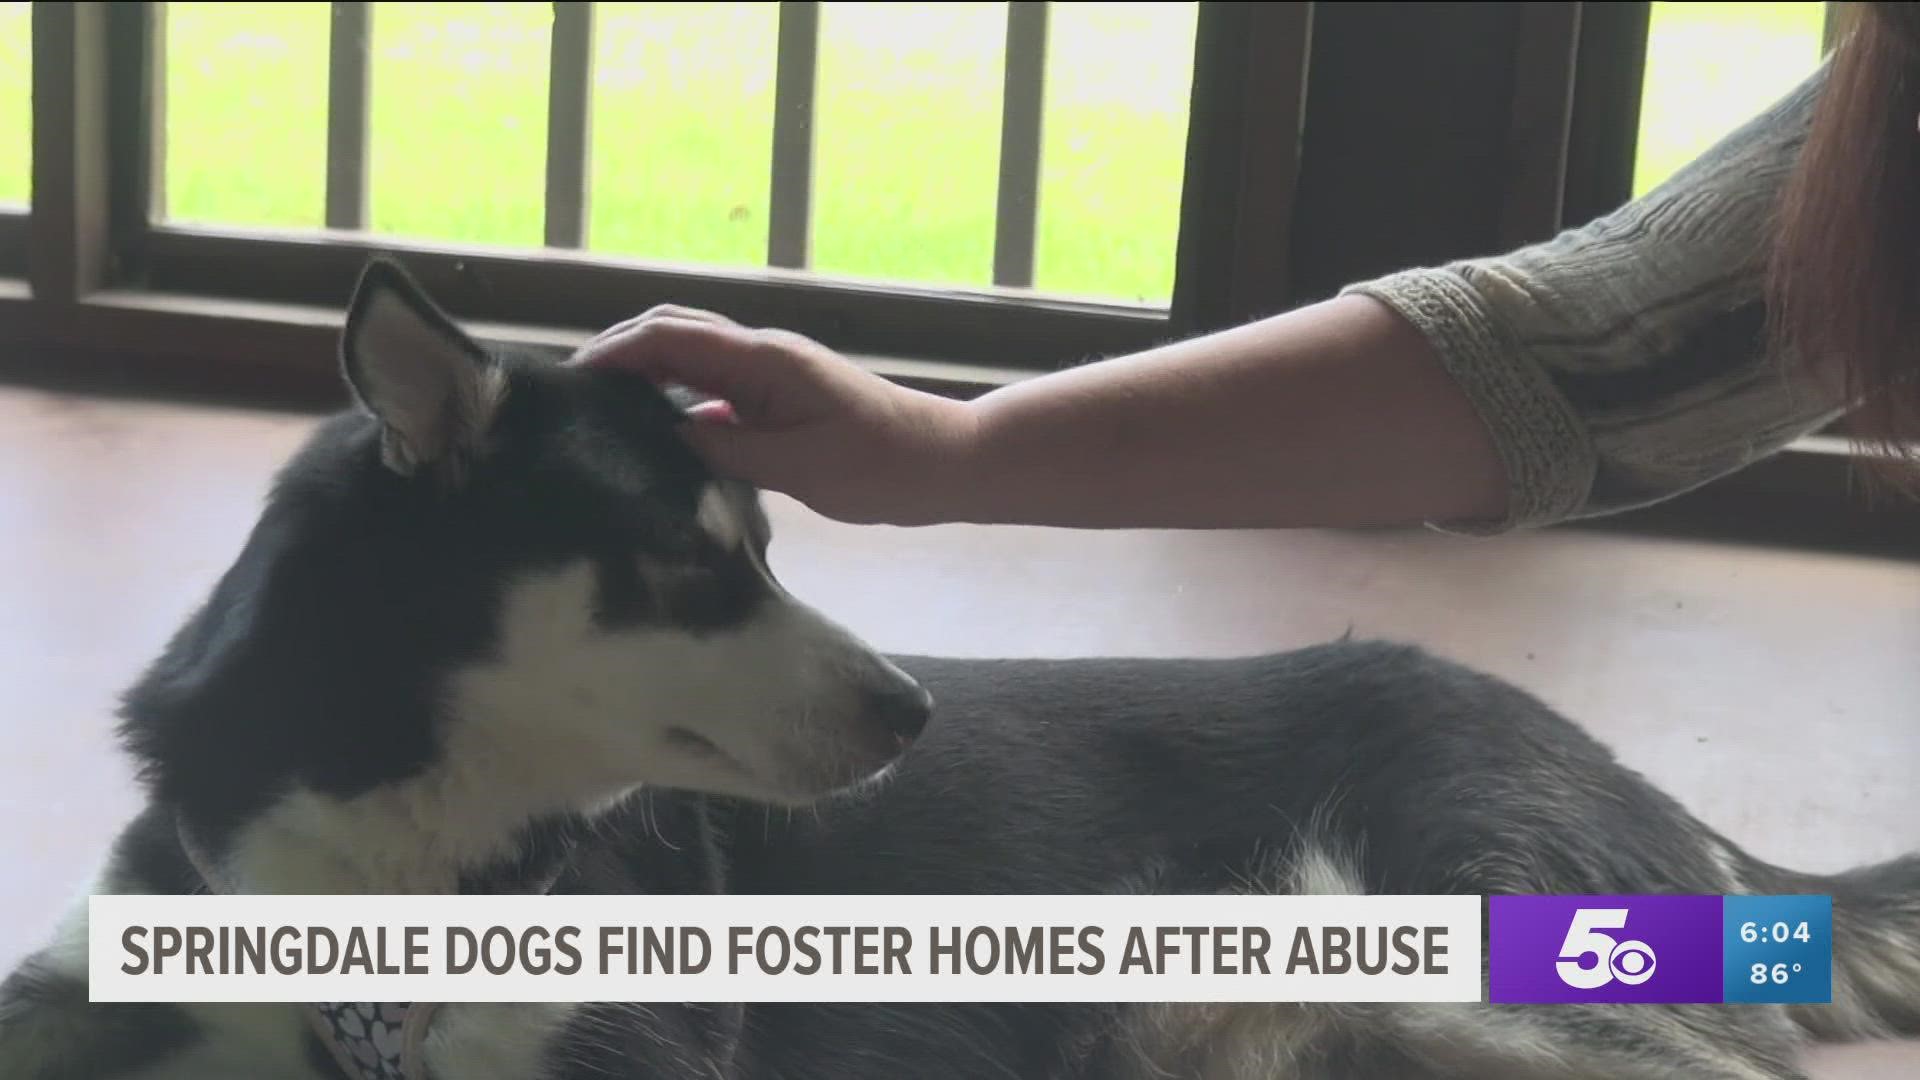 The two dogs drug behind an SUV two weeks ago have been surrendered to the city and recovering in a foster home.